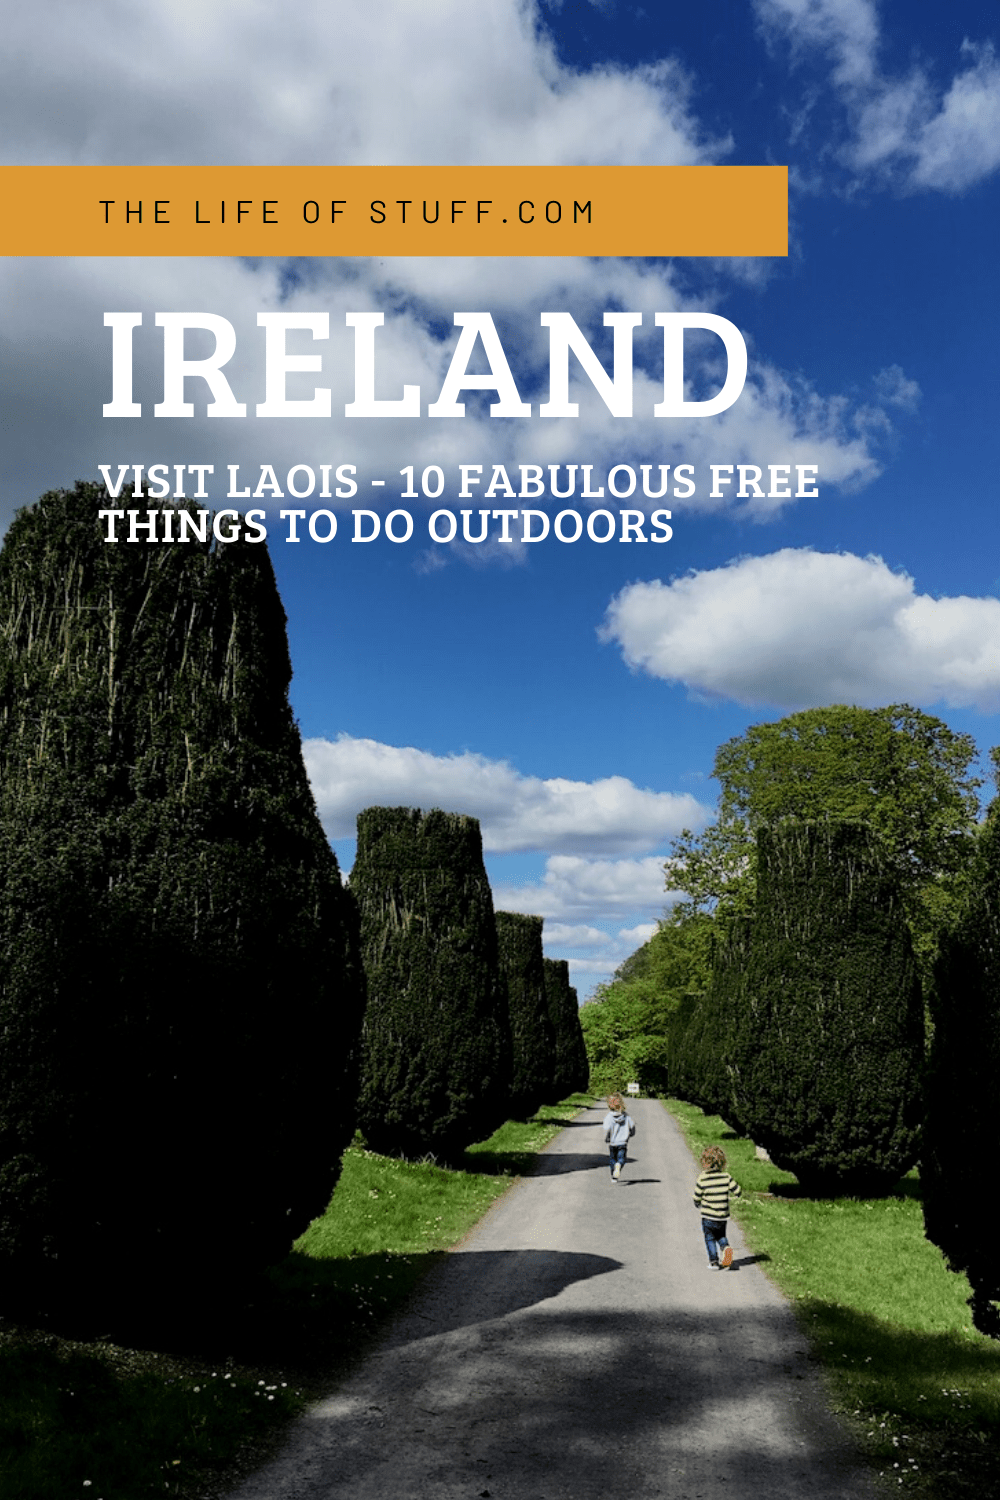 Visit Laois – 10 Fabulous Free Things to Do Outdoors - The Life of Stuff.com